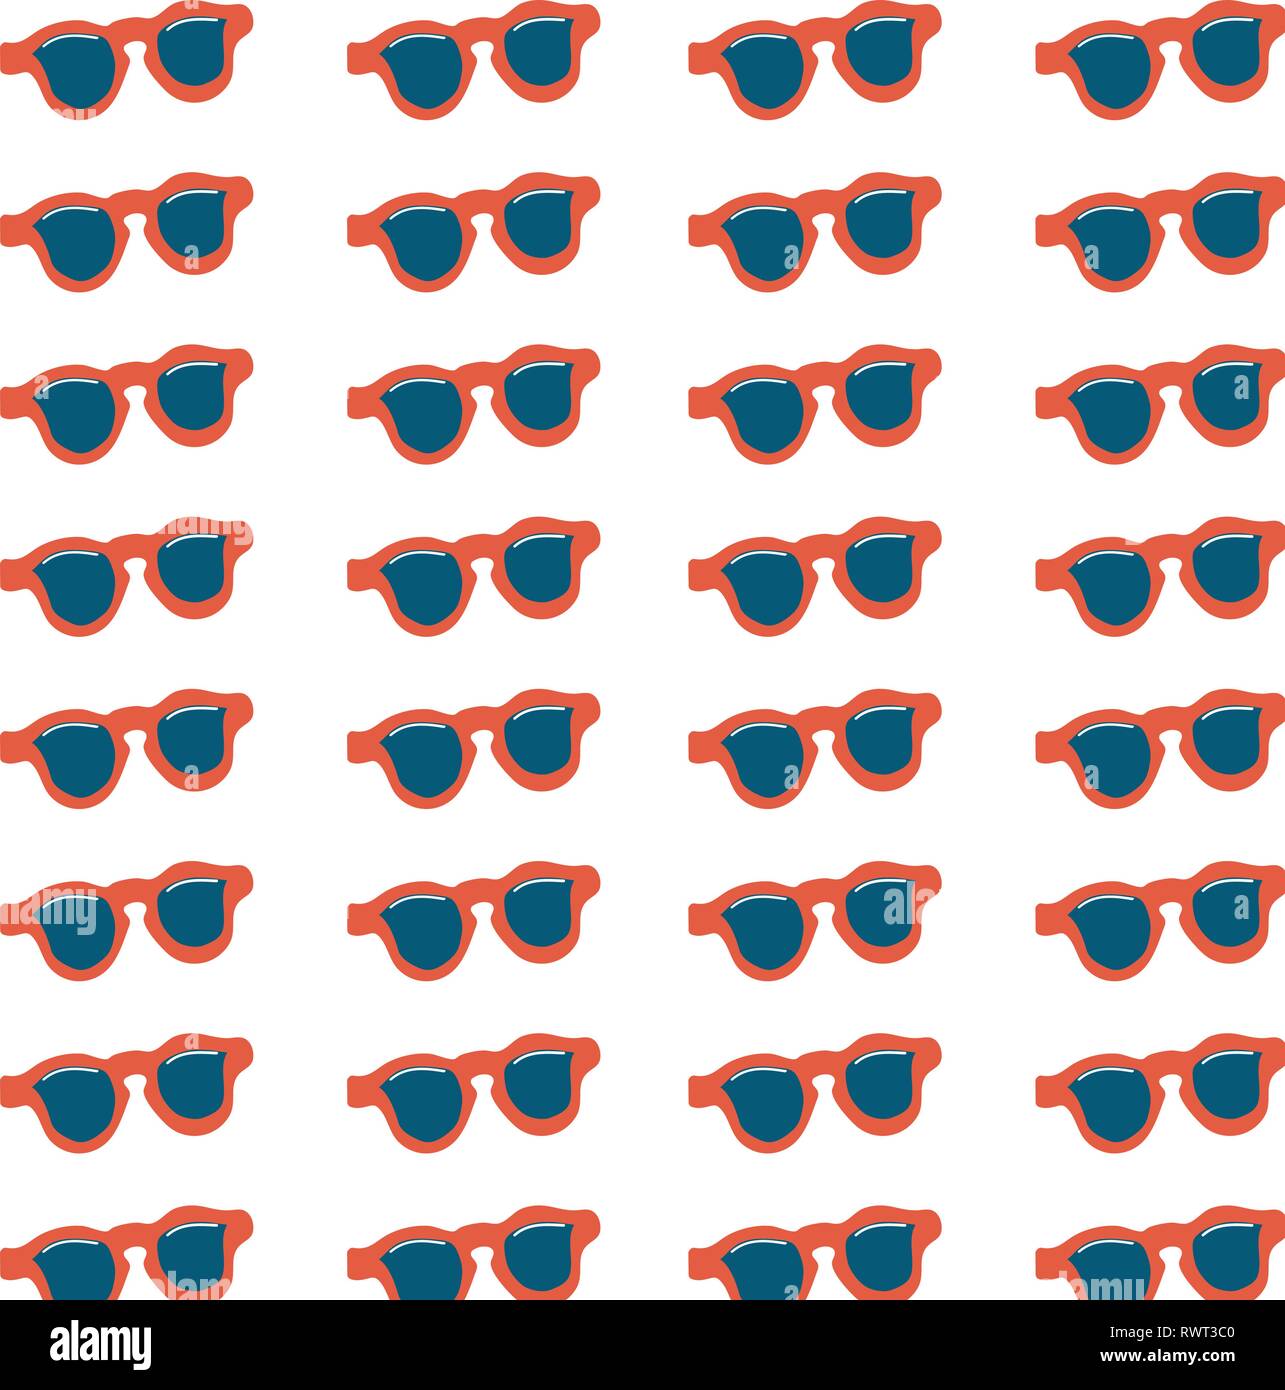 Cool sunglasses vector pattern Stock Vector